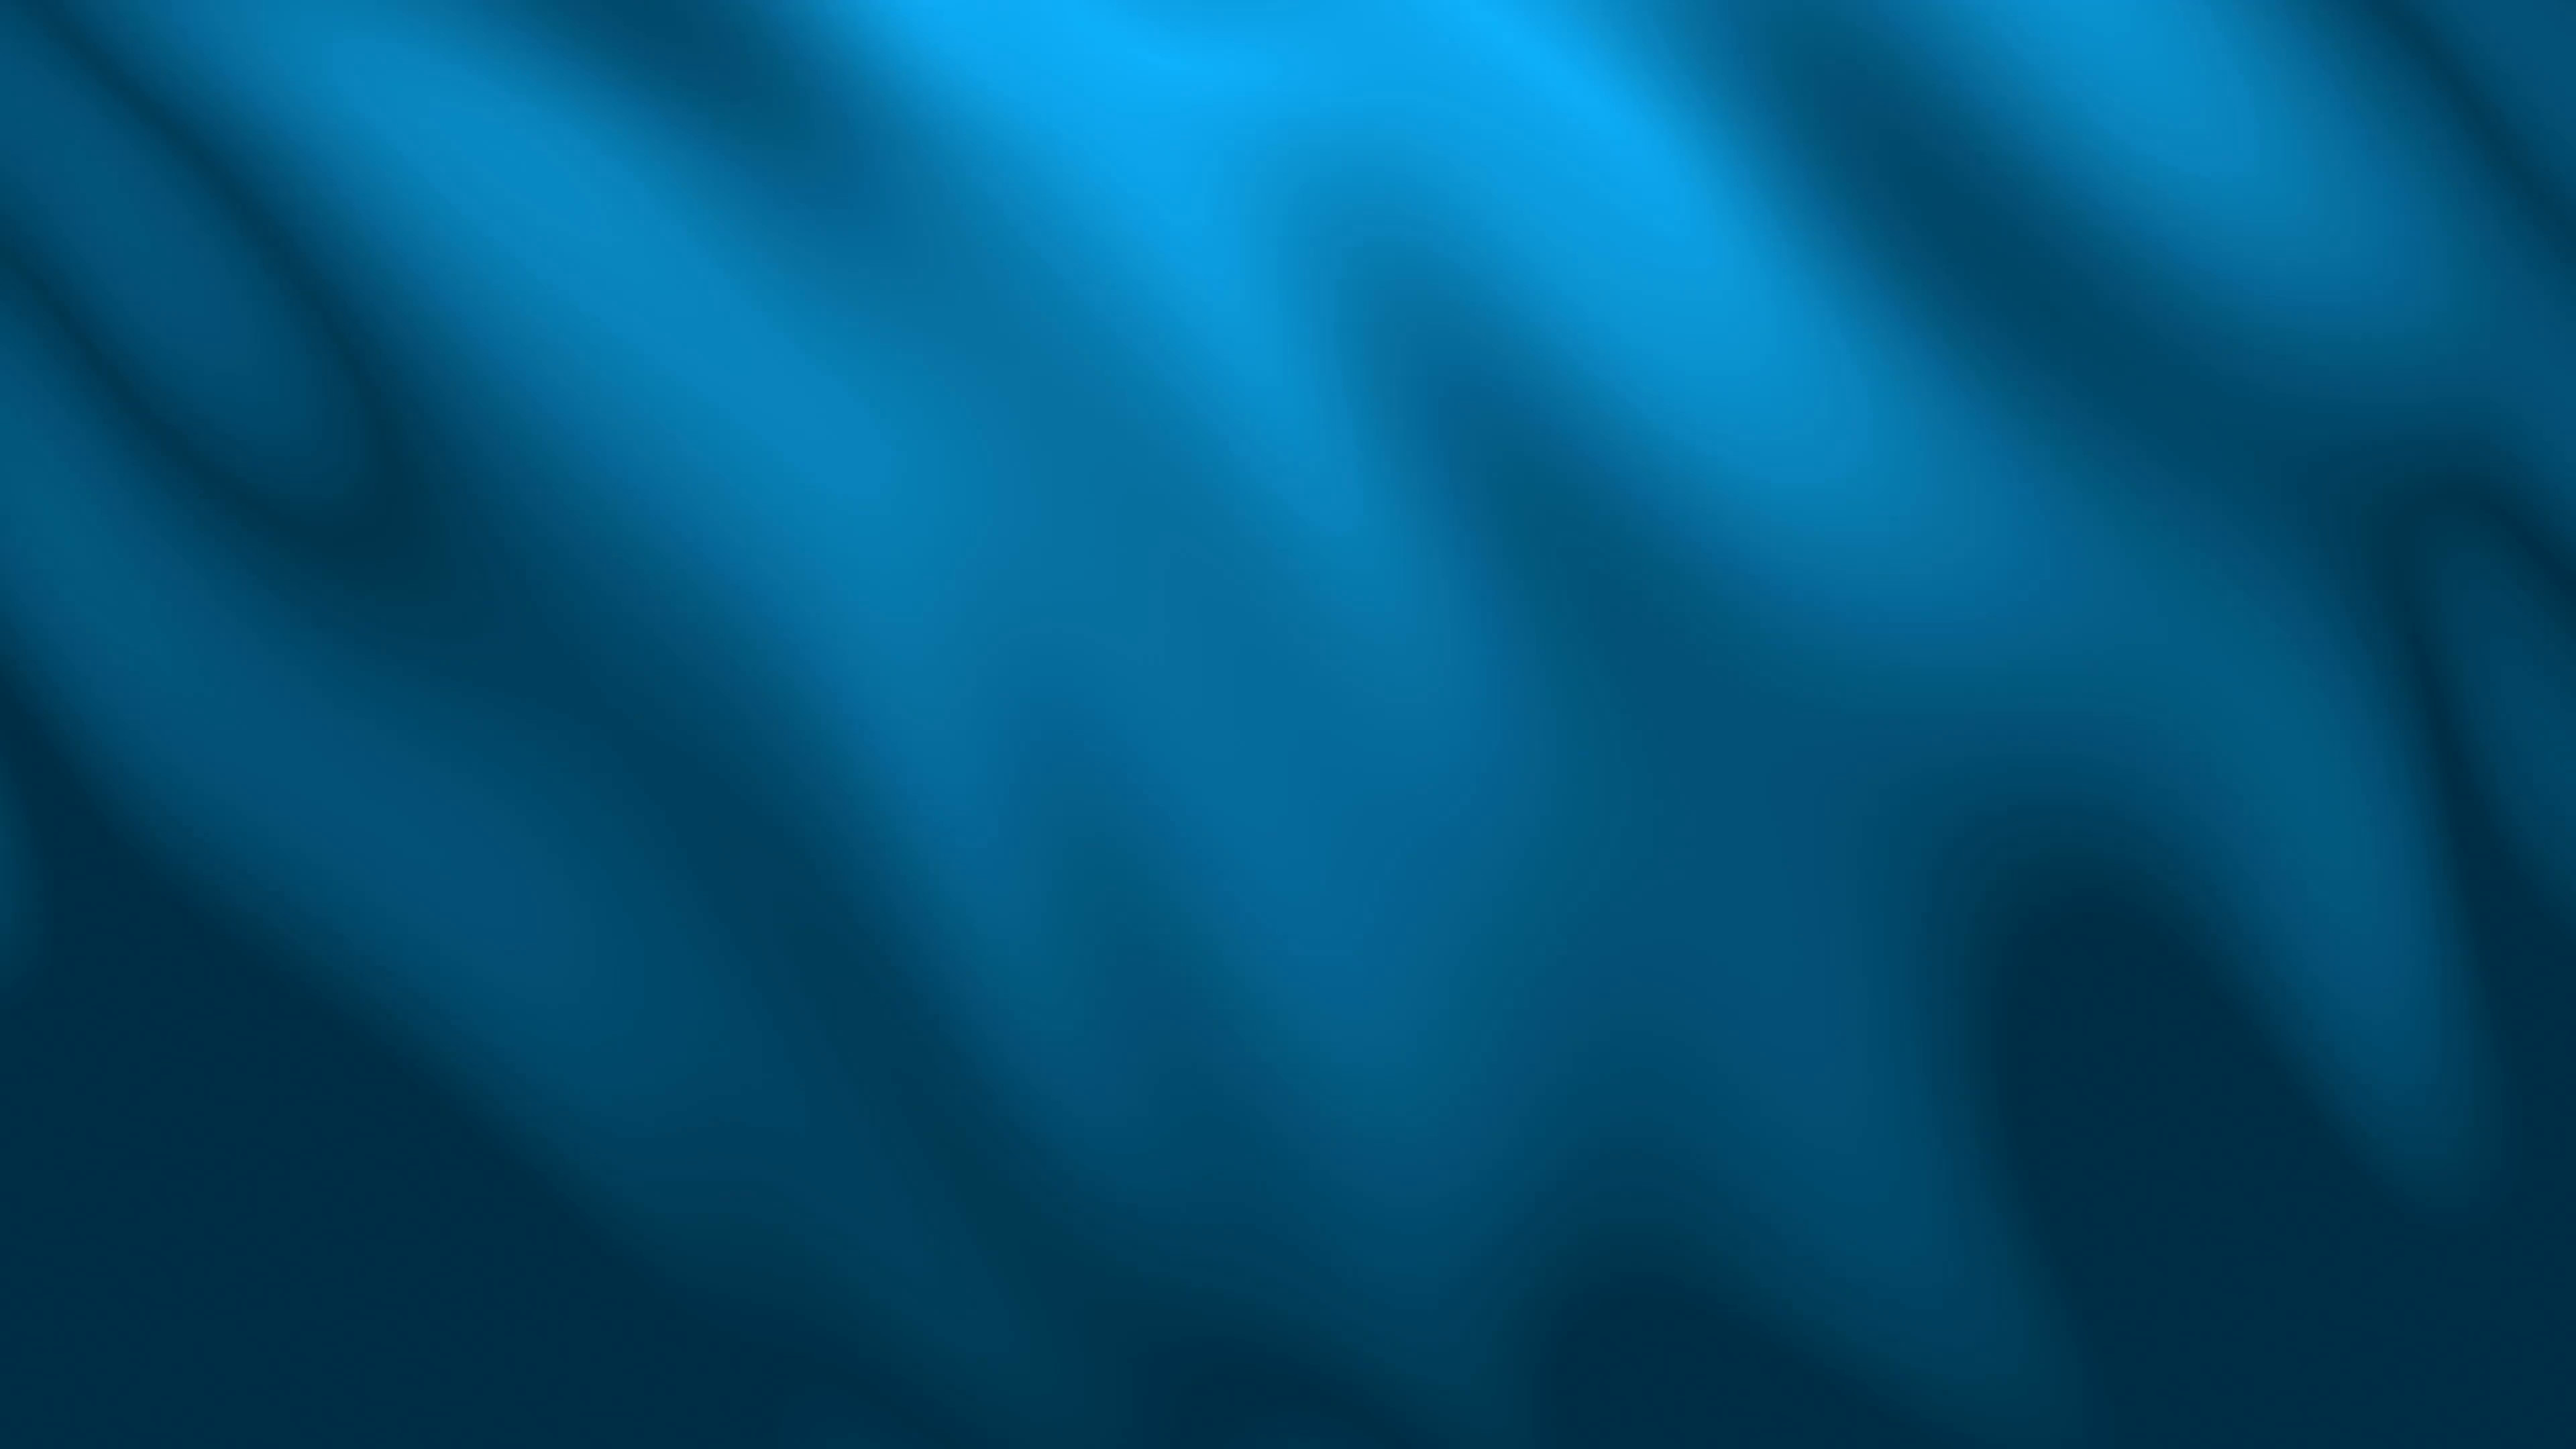 3840x2160 Subscription Library 4k Light Blue Fabric Wave Animation Background  Seamless Loop.